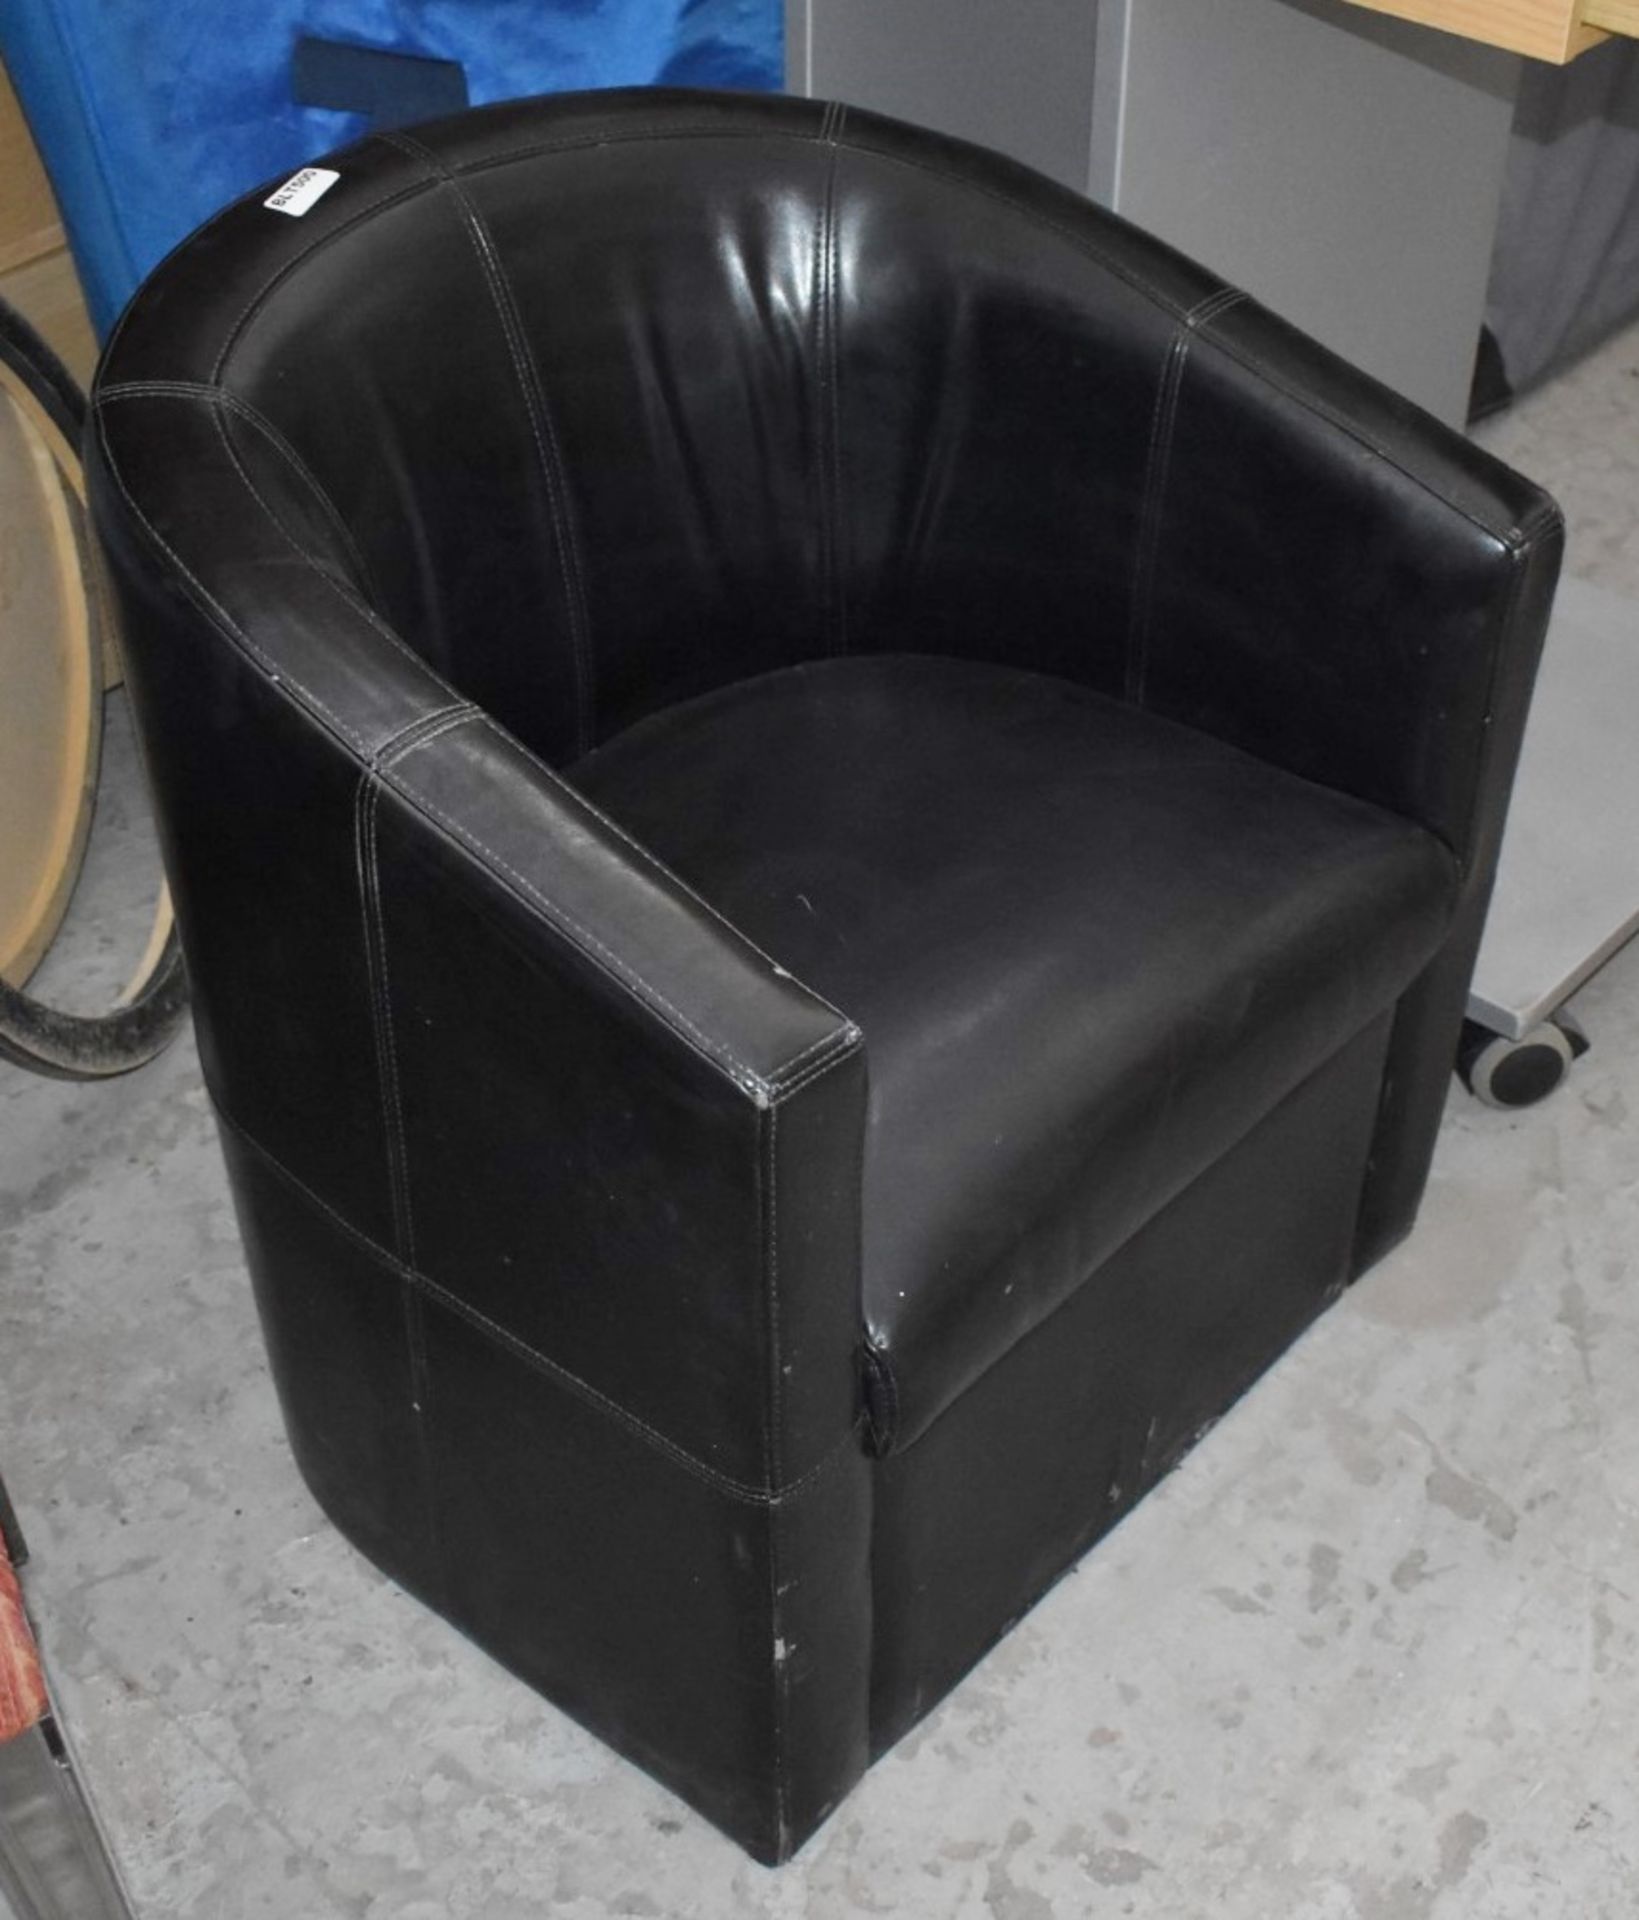 1 x Tub Chair Upholstered in Black Faux Leather - H93 x W68 x D62 cms - Ref BLT500 - CL011 - - Image 2 of 3